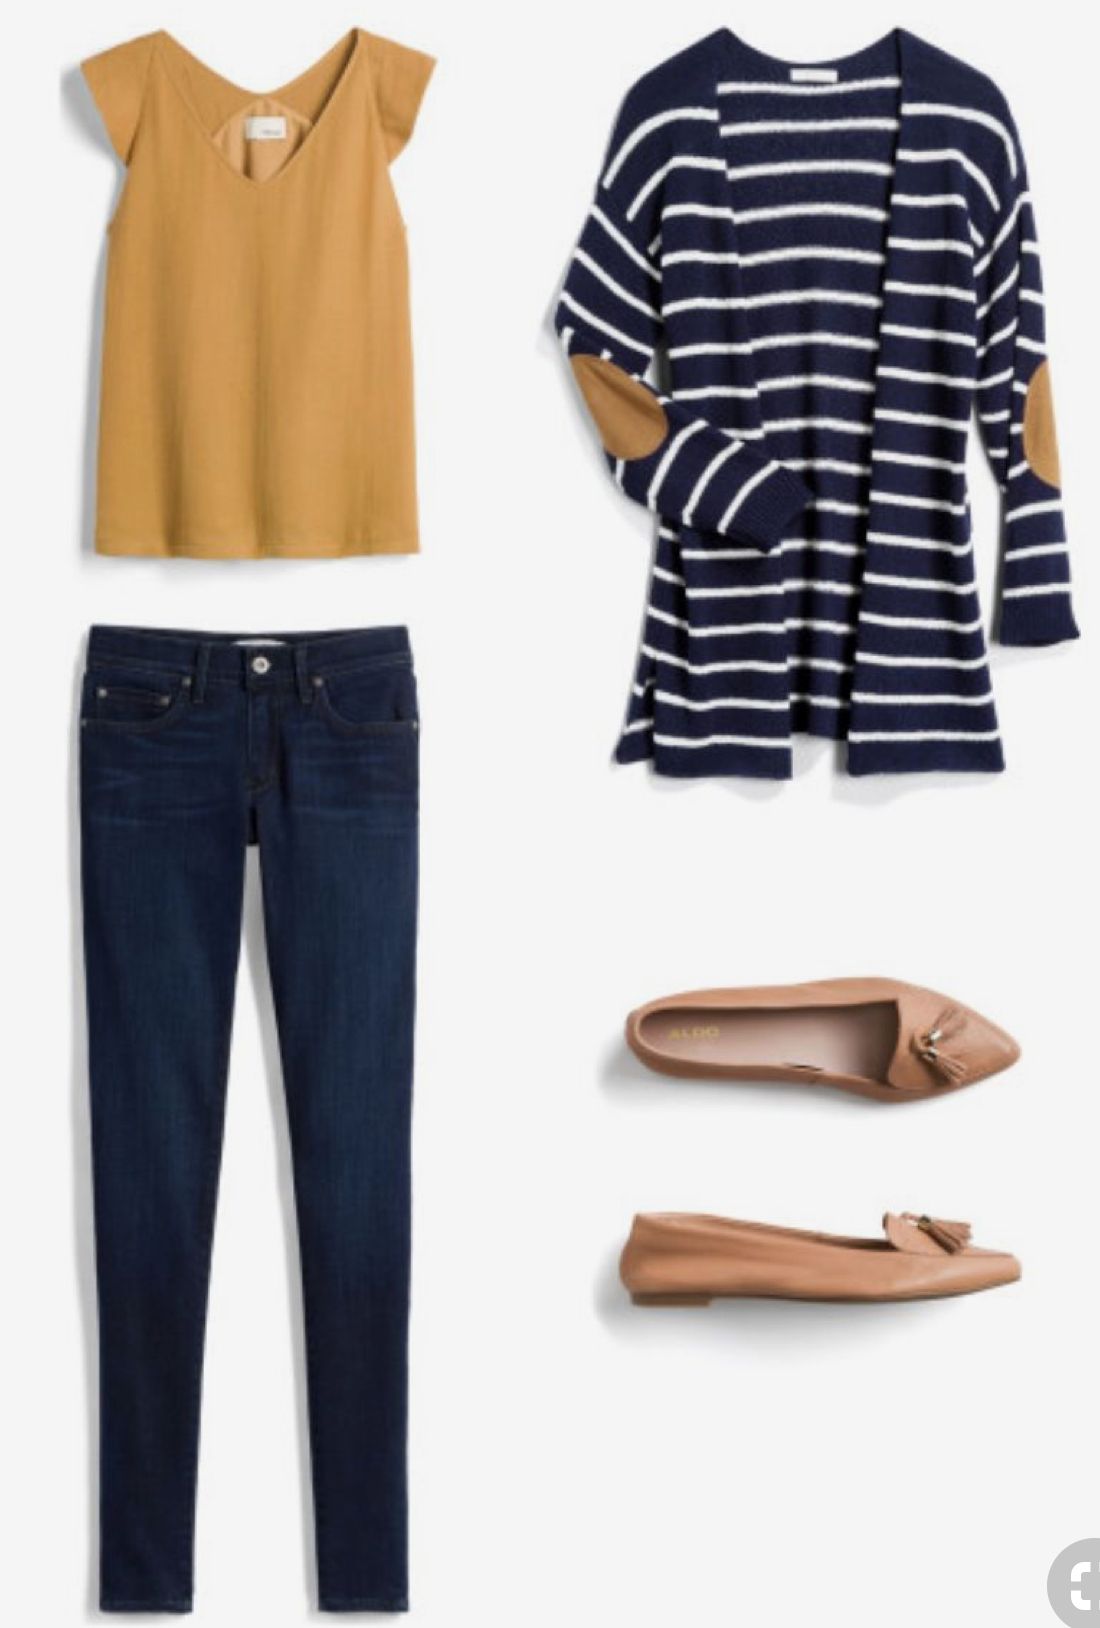 Elbow Patch Shirt Outfit Ideas